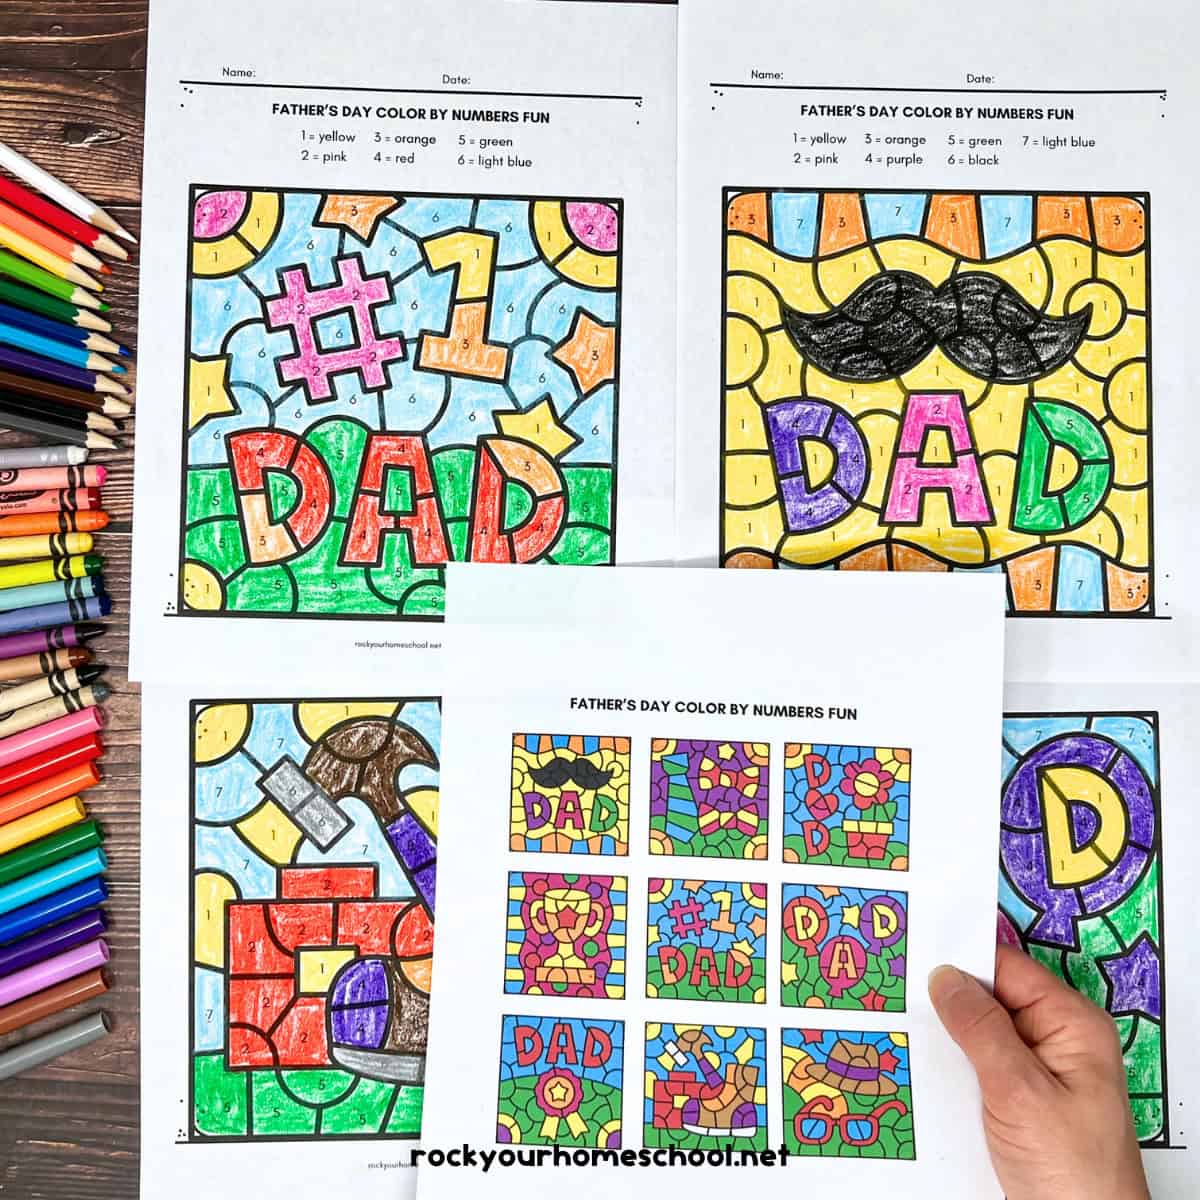 Four examples of free printable Father's Day color by number pages and woman holding color answer key.